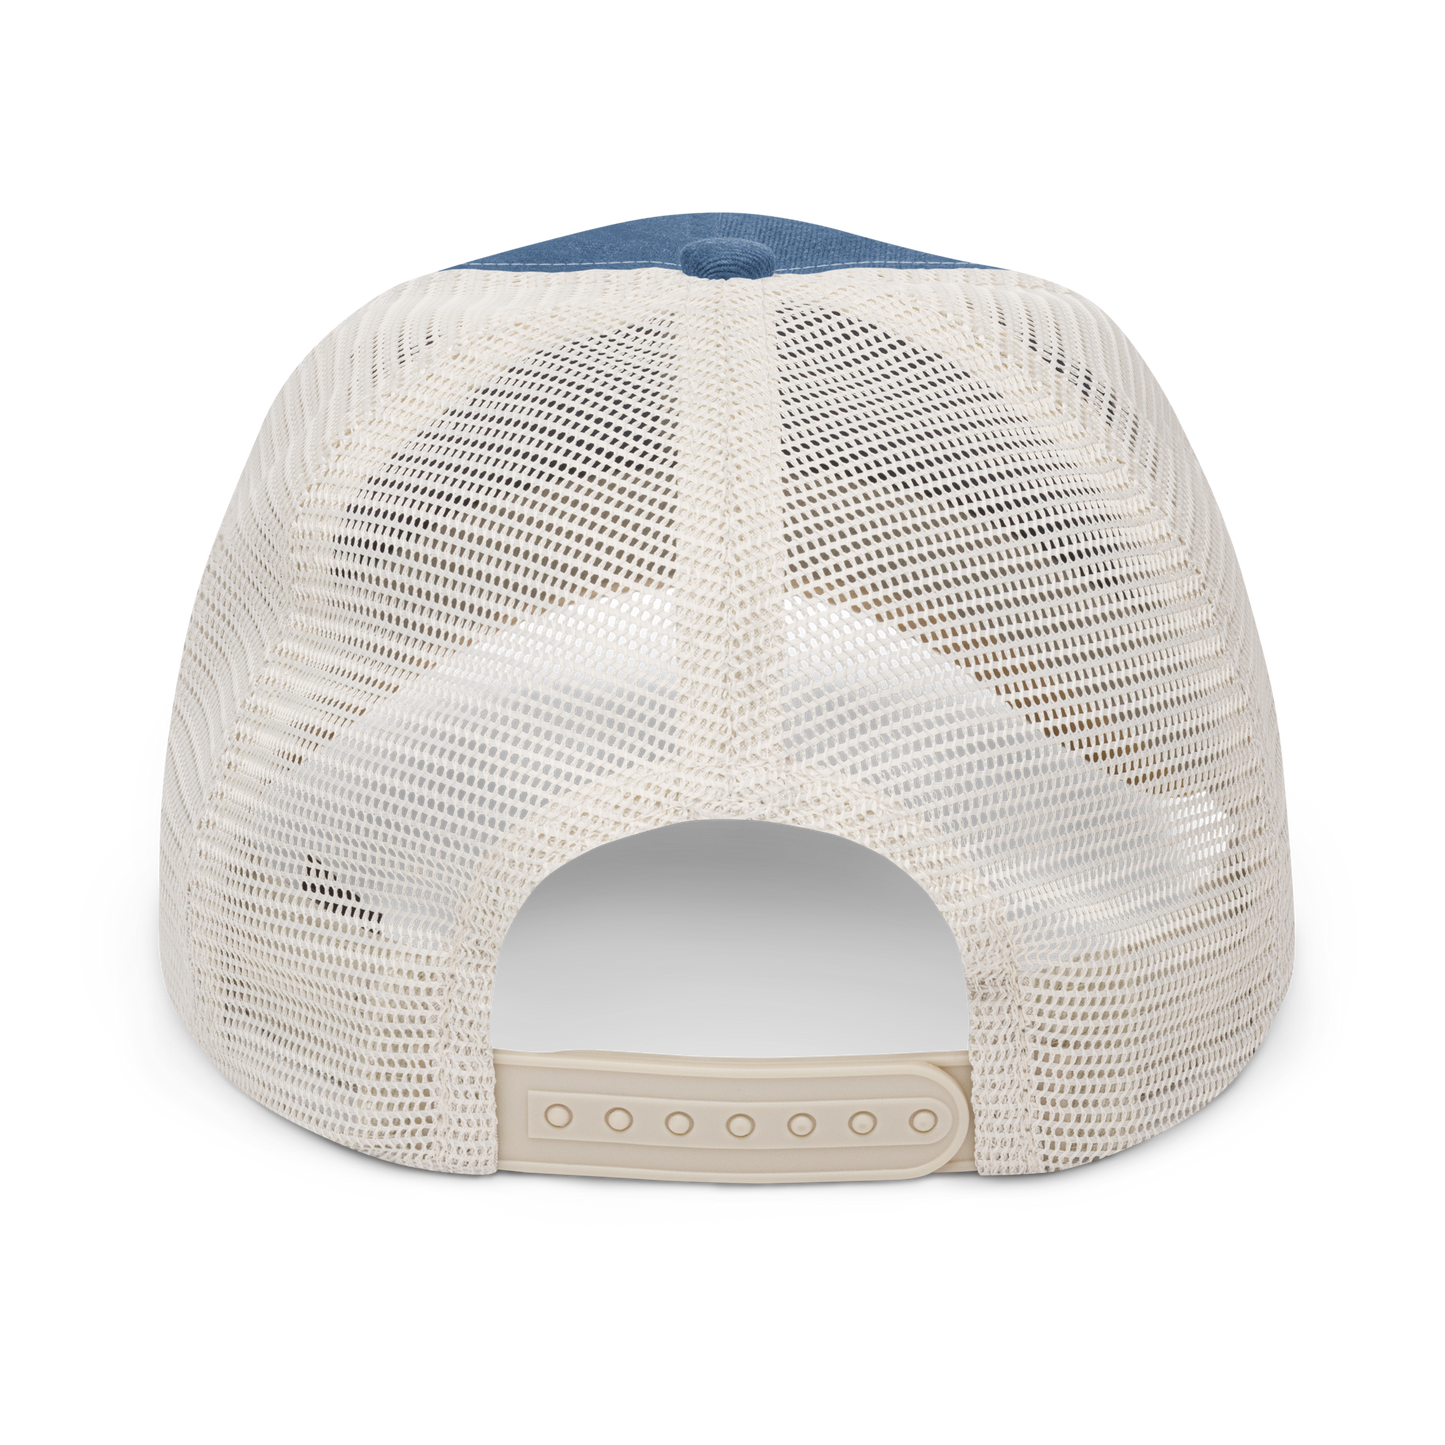 YHM Designs - YXU London Pigment-Dyed Trucker Cap - Crossed-X Design with Airport Code and Vintage Propliner - White Embroidery - Image 19